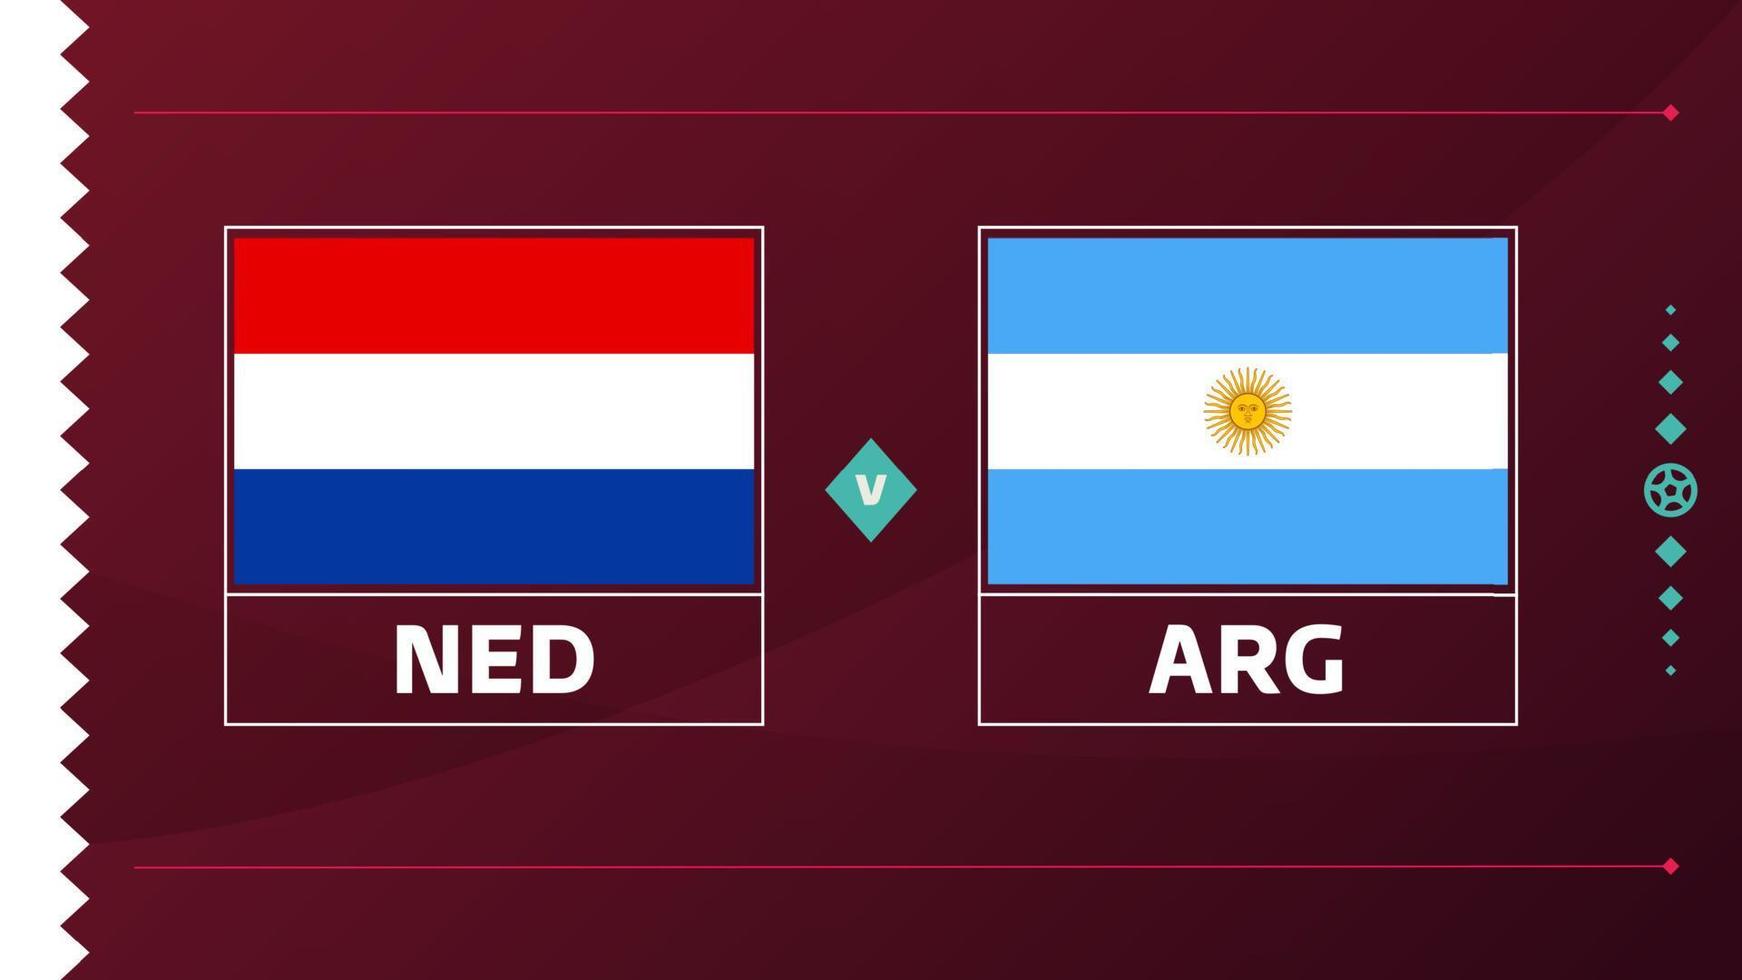 netherlands argentina playoff quarter finals match Football 2022. 2022 World Football championship match versus teams intro sport background, championship competition poster, vector